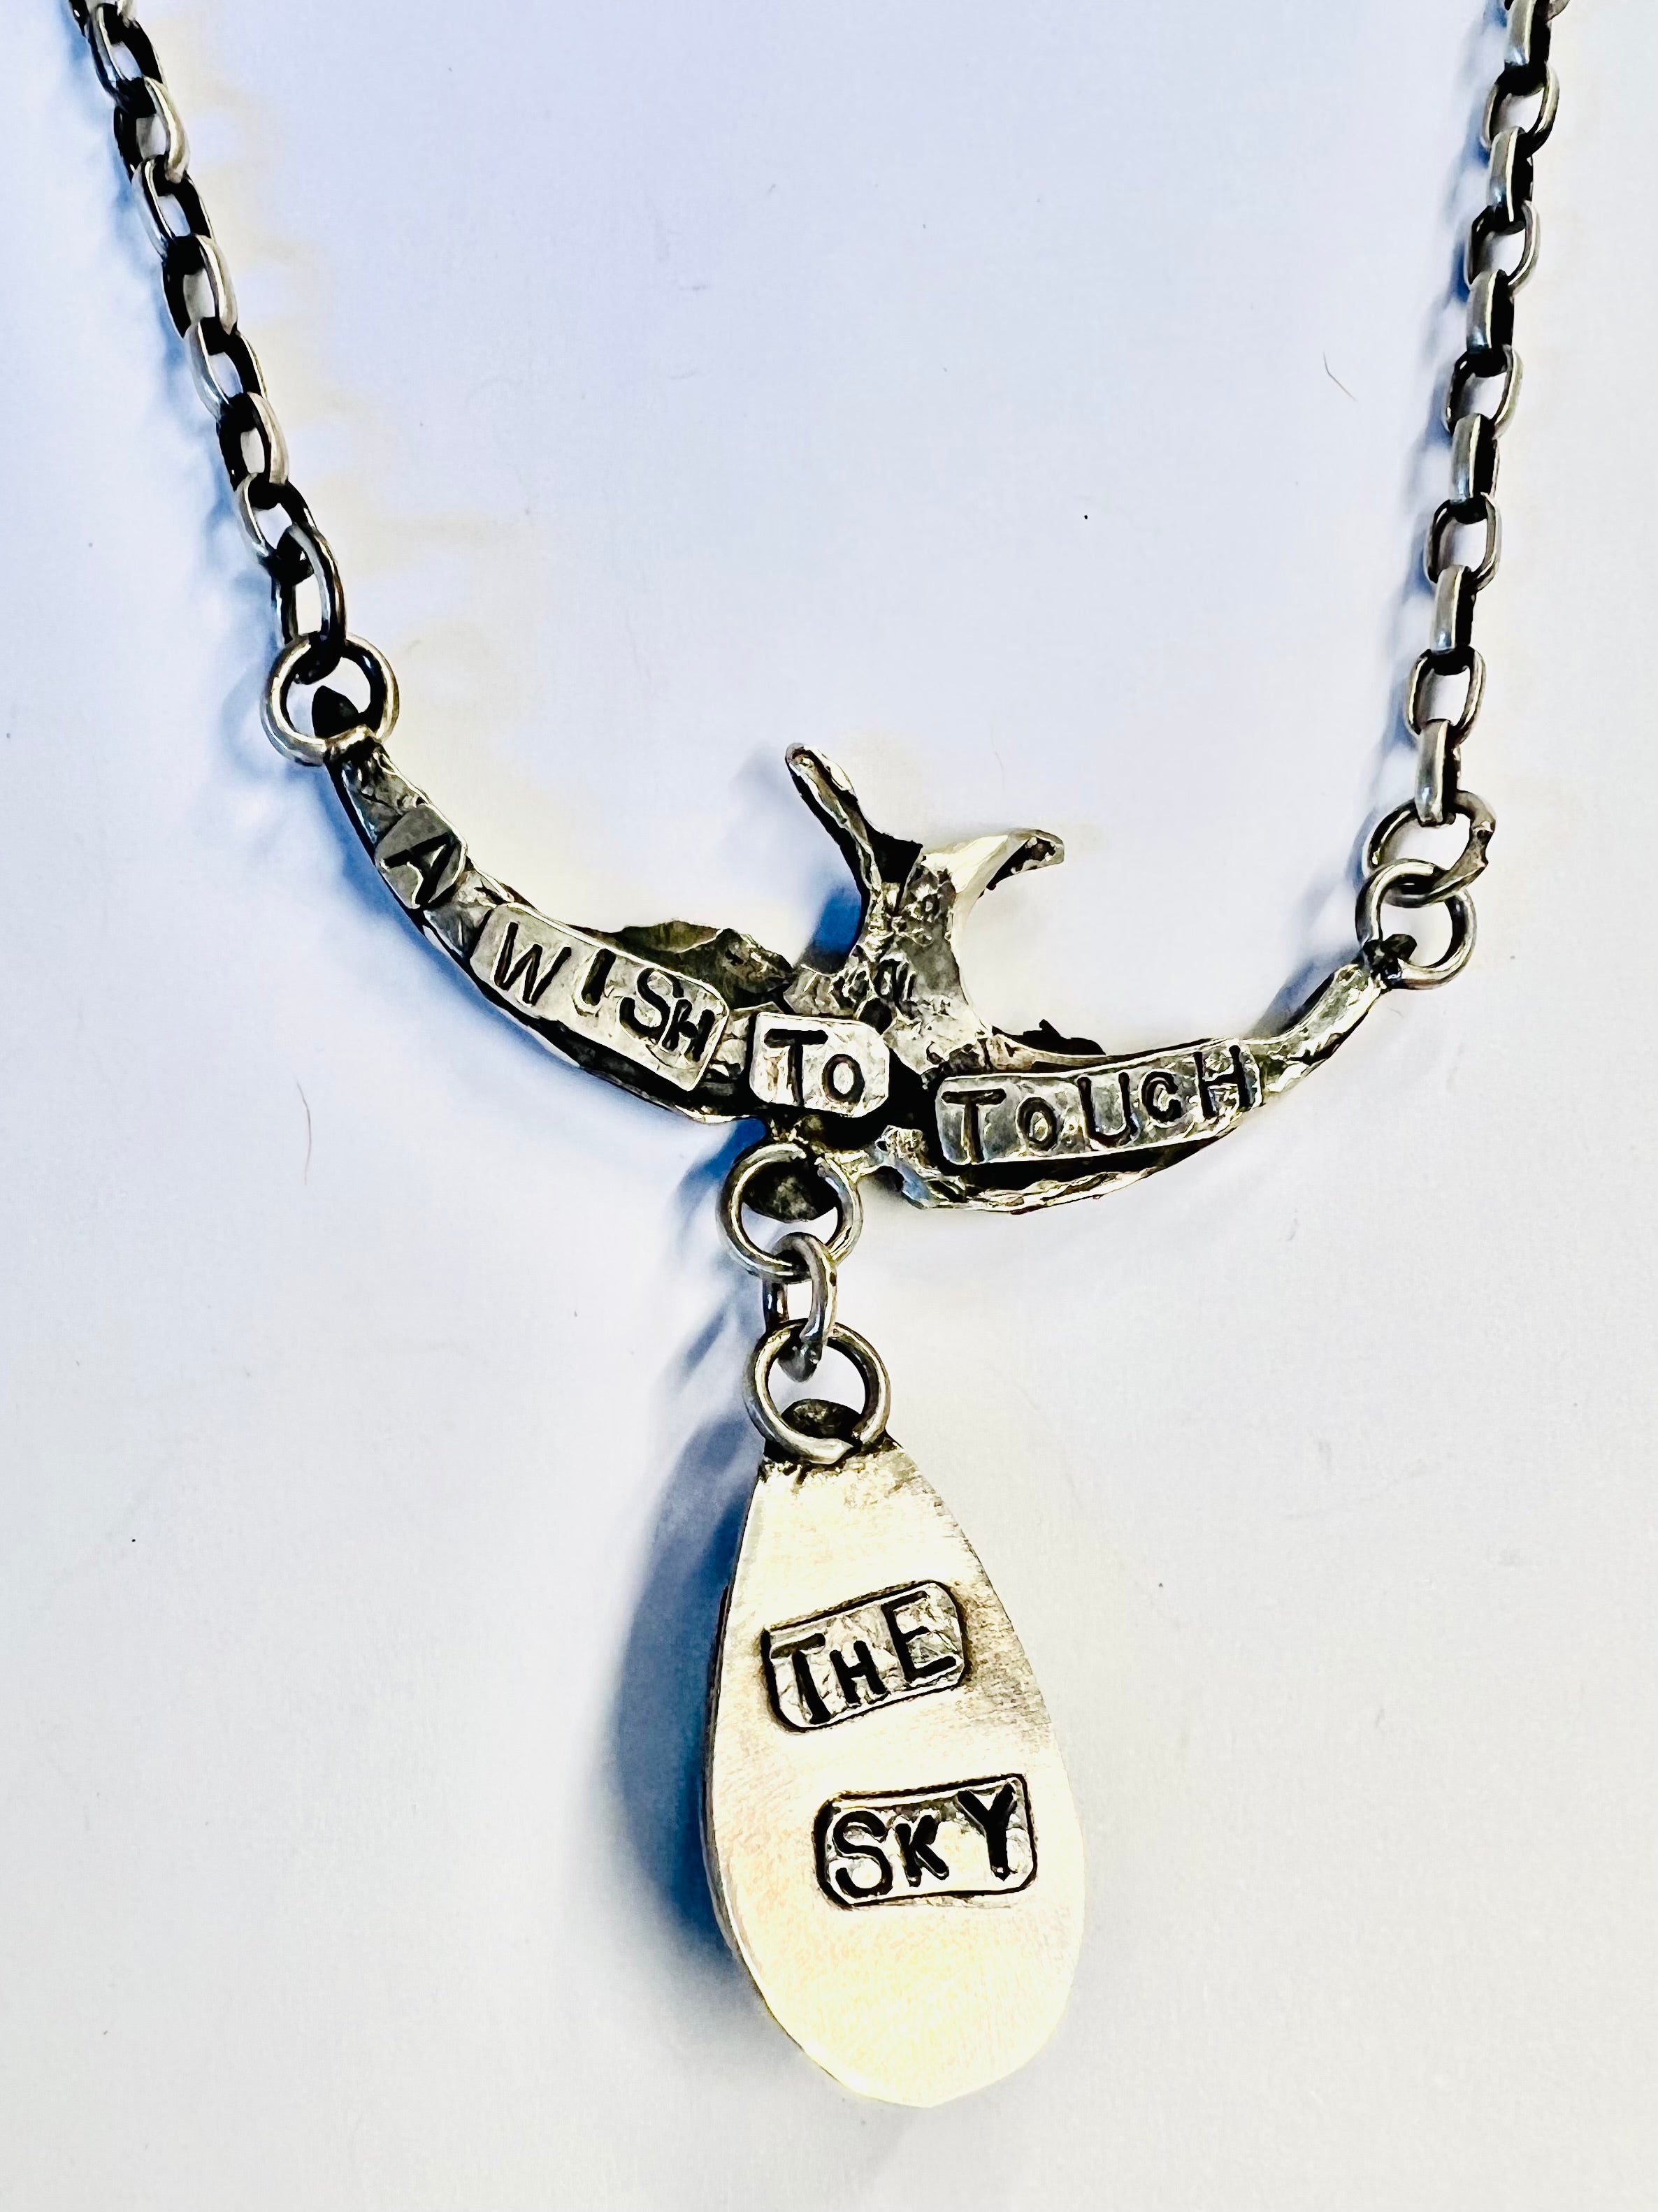 A Wish To Touch The Sky Necklace